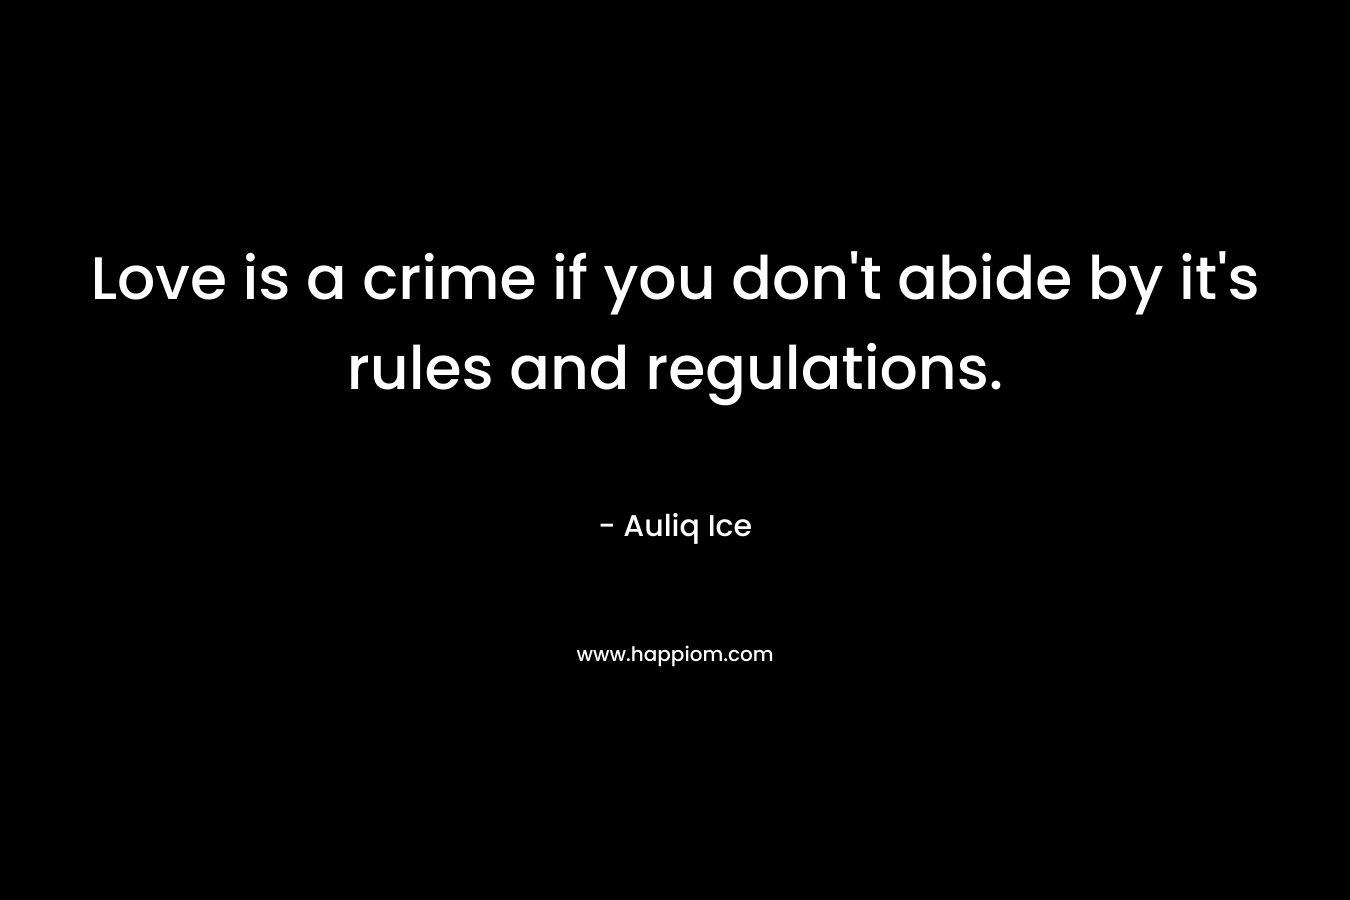 Love is a crime if you don’t abide by it’s rules and regulations. – Auliq Ice